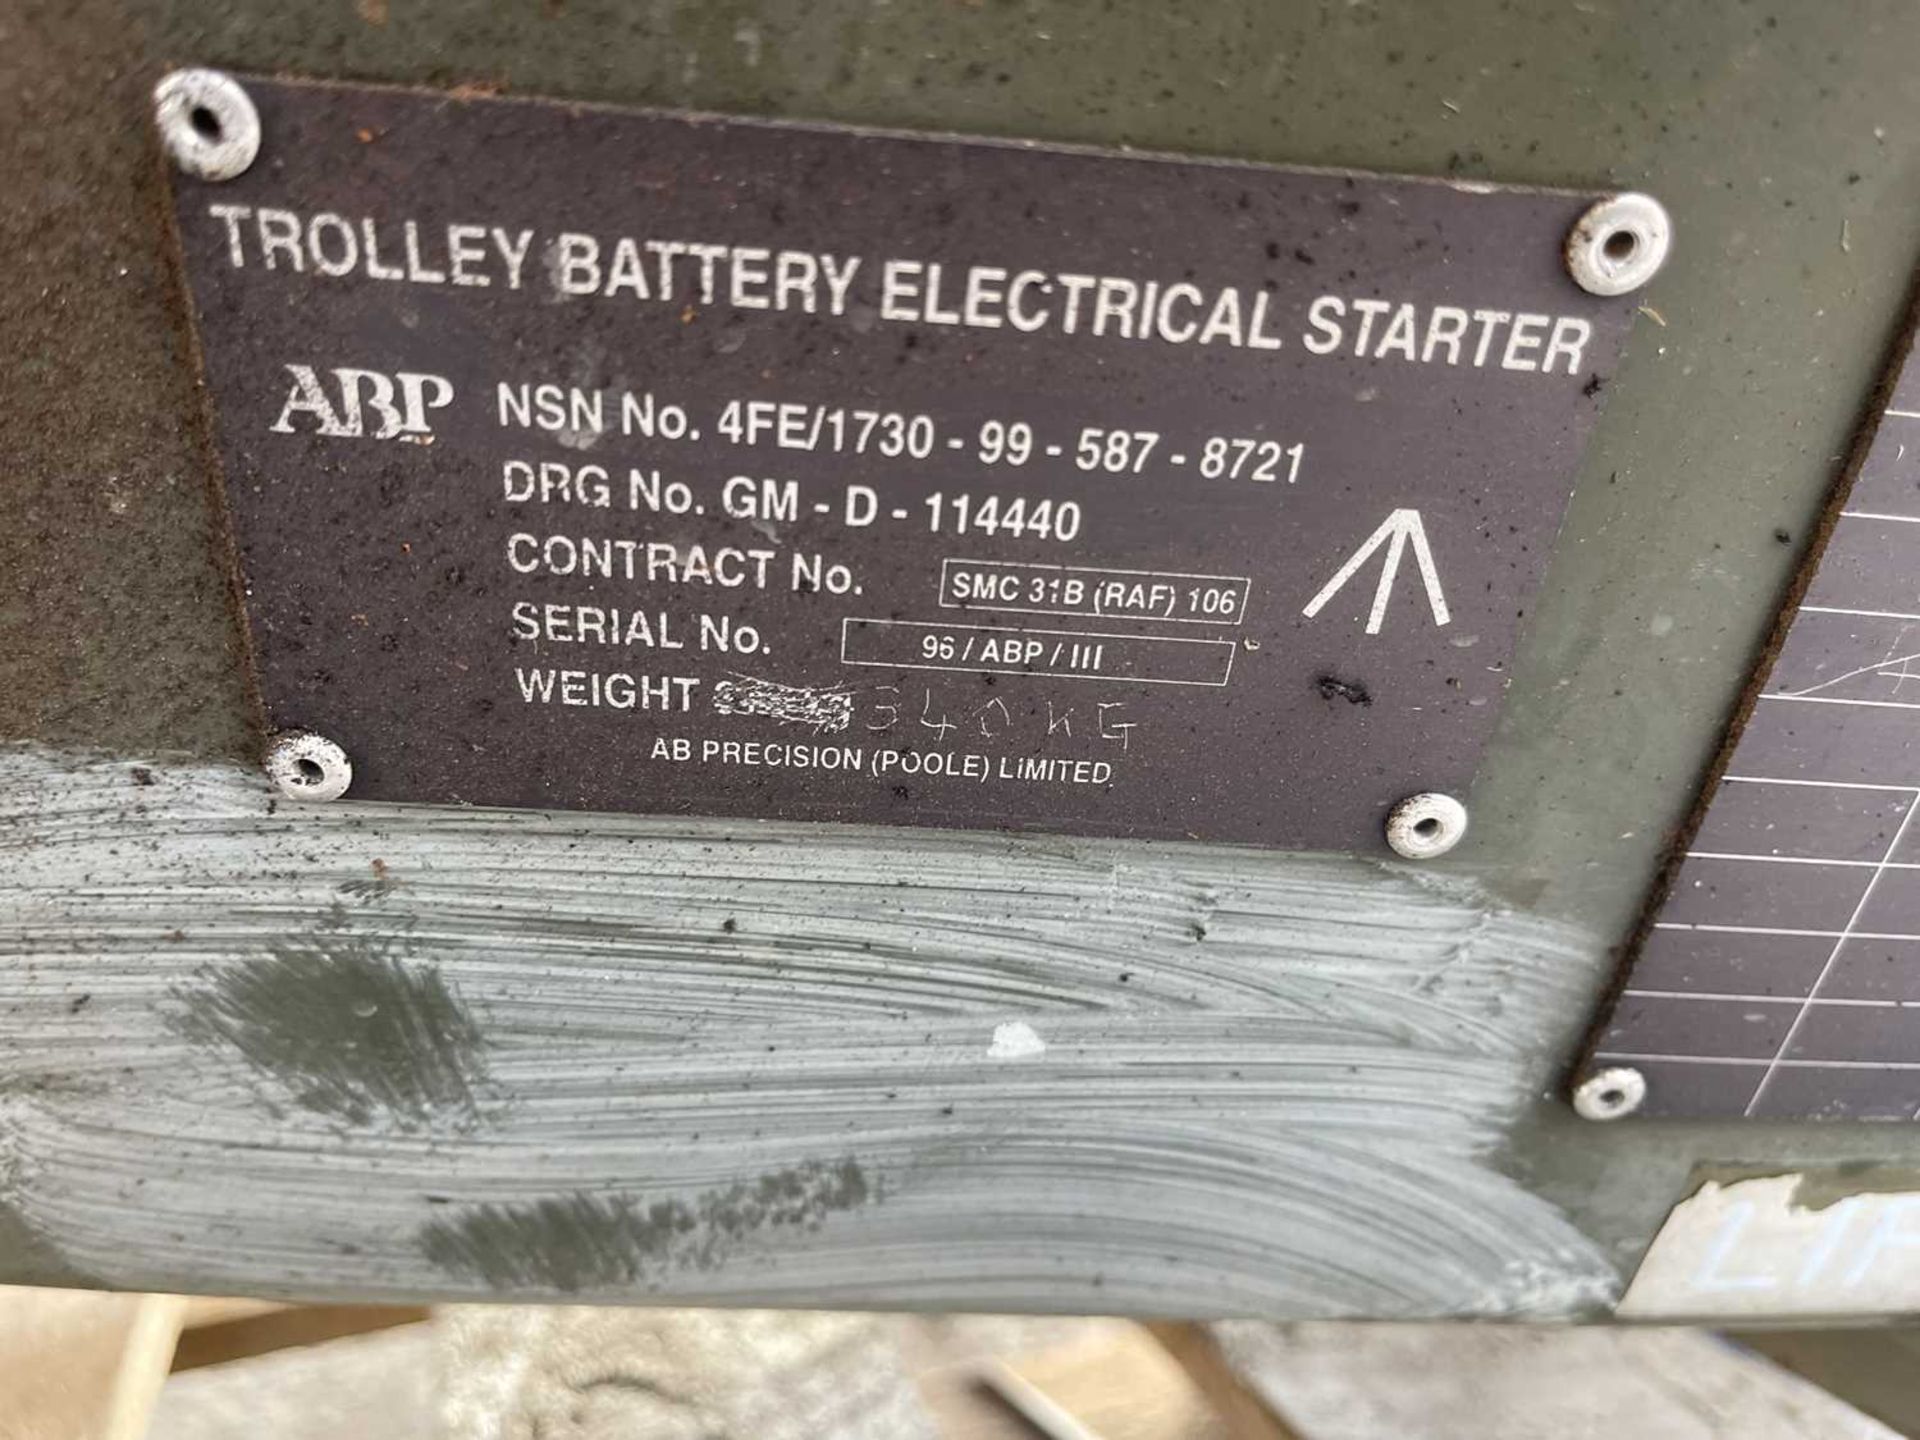 Trolley Battery Electrical Starter - Image 8 of 8